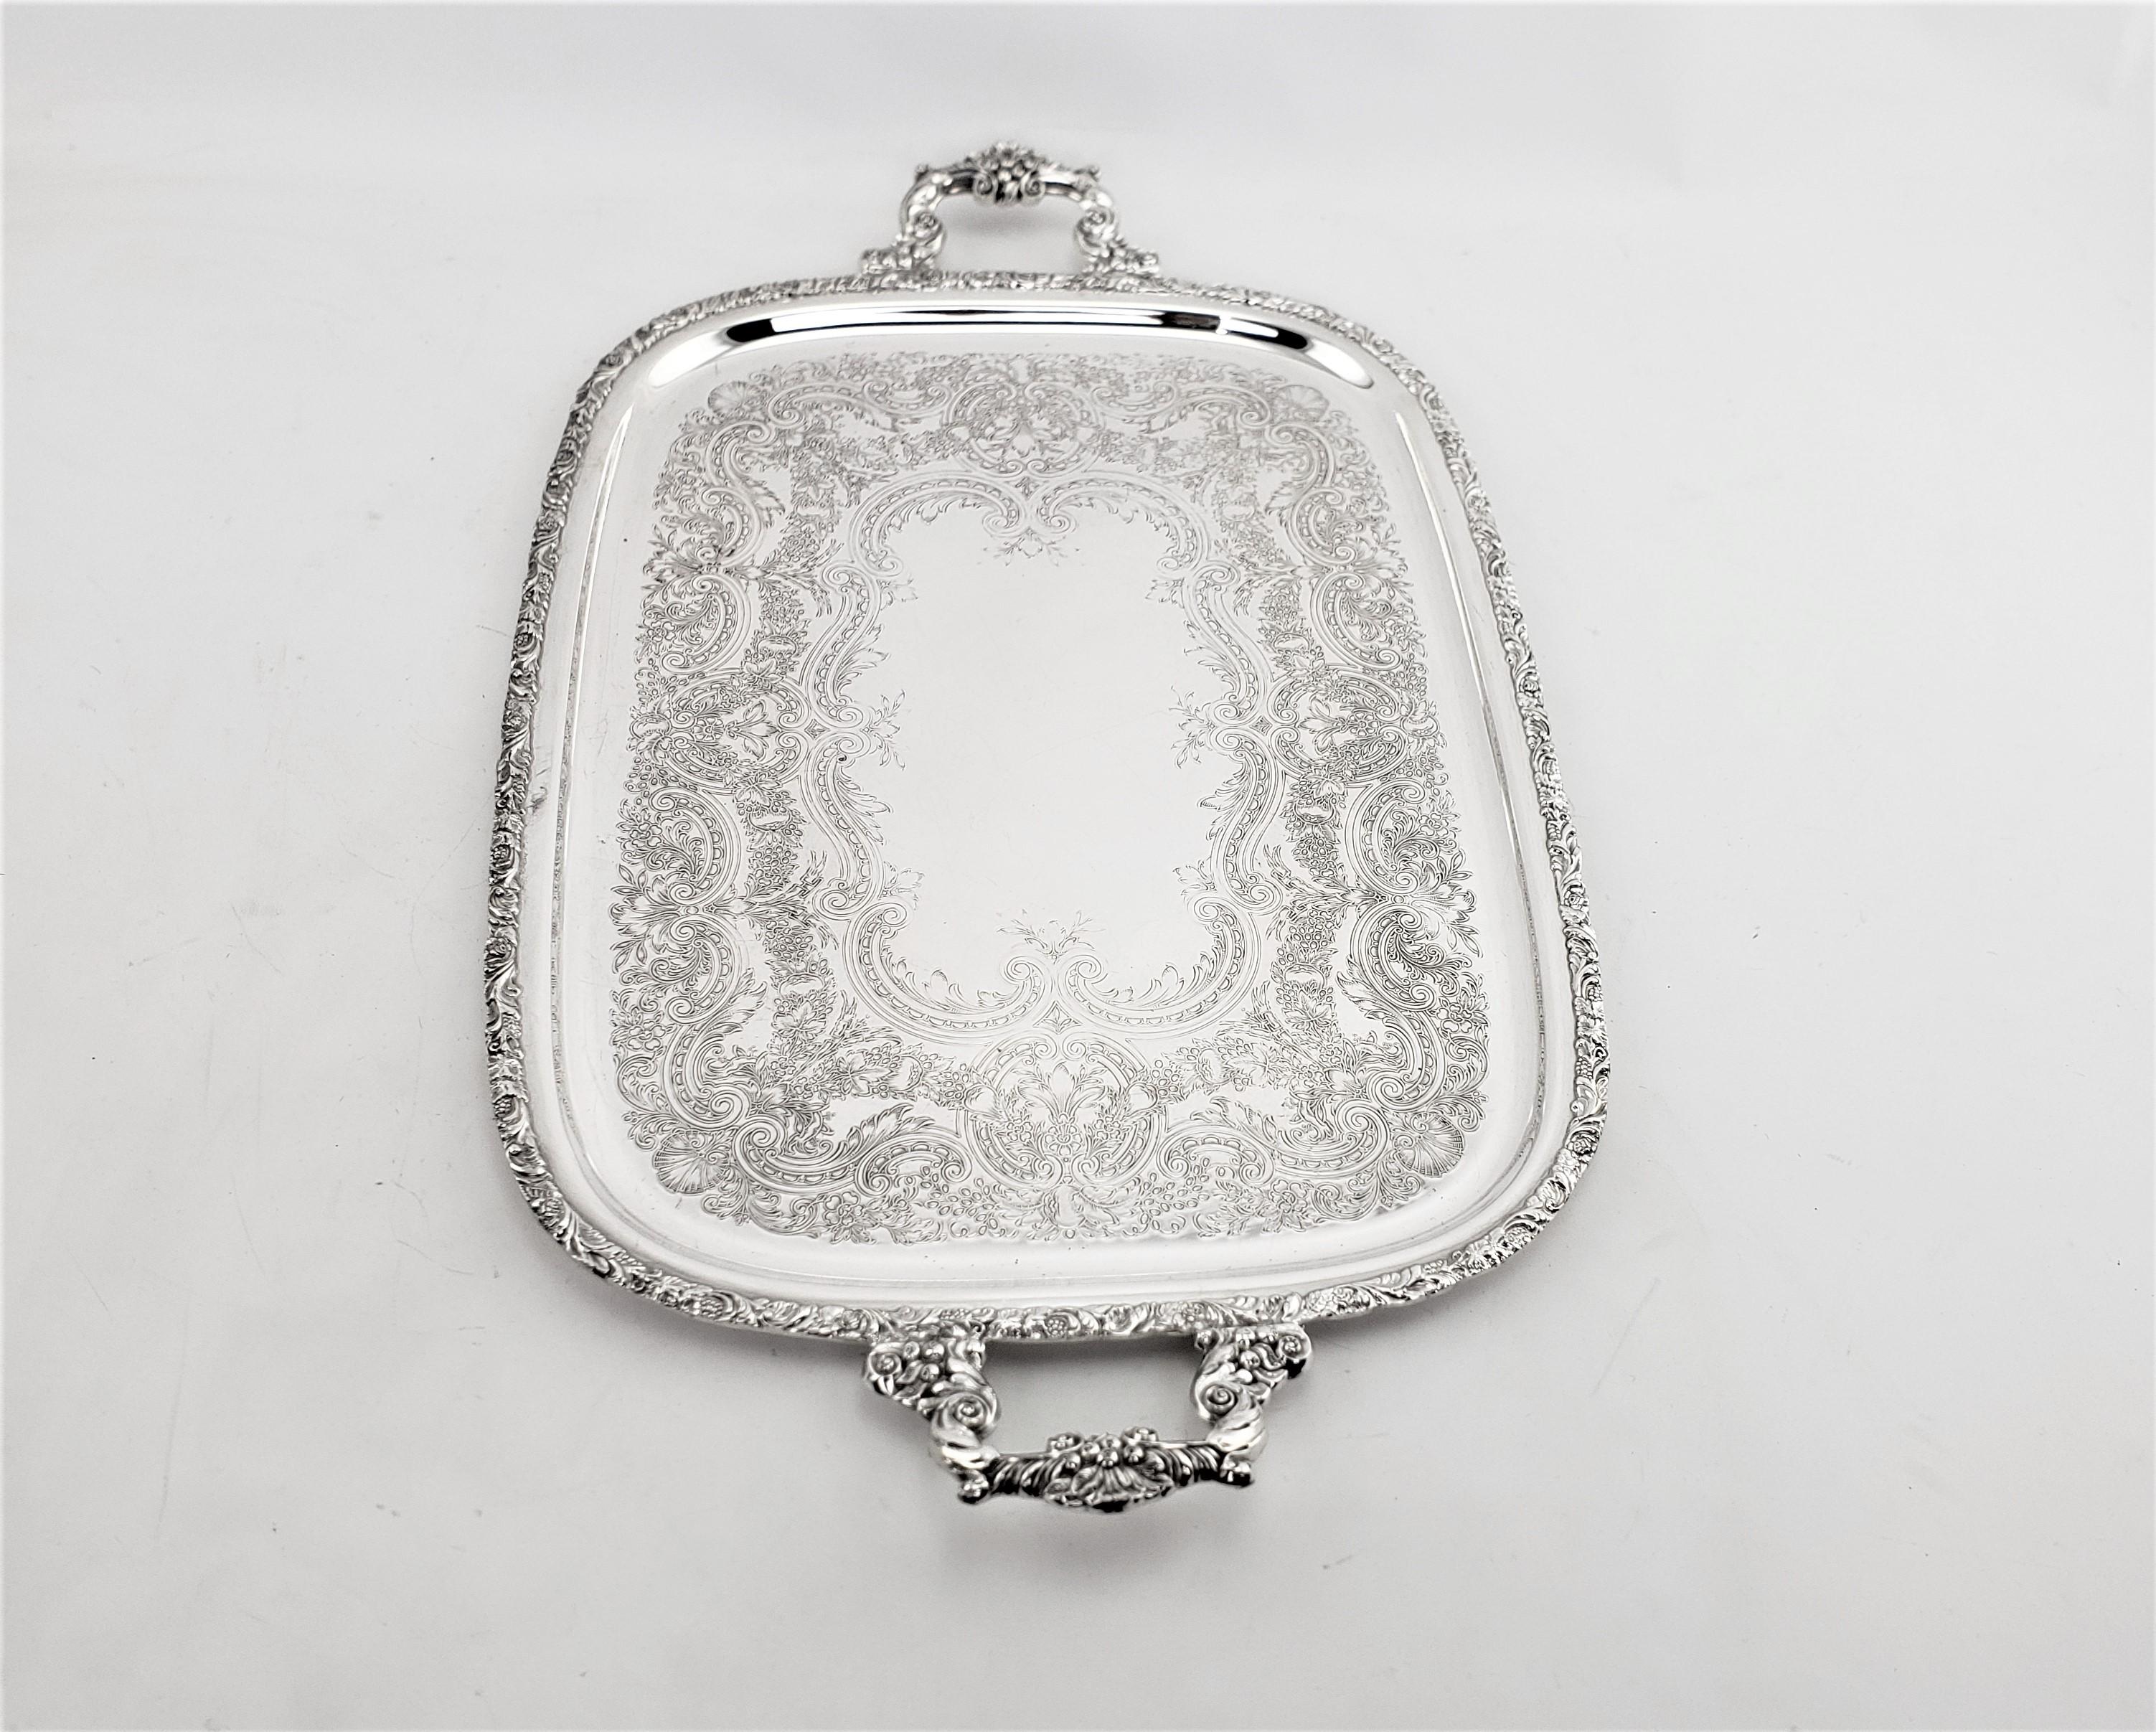 Large Antique English Silver Plated Serving Tray with Ornate Handles & Engraving 1